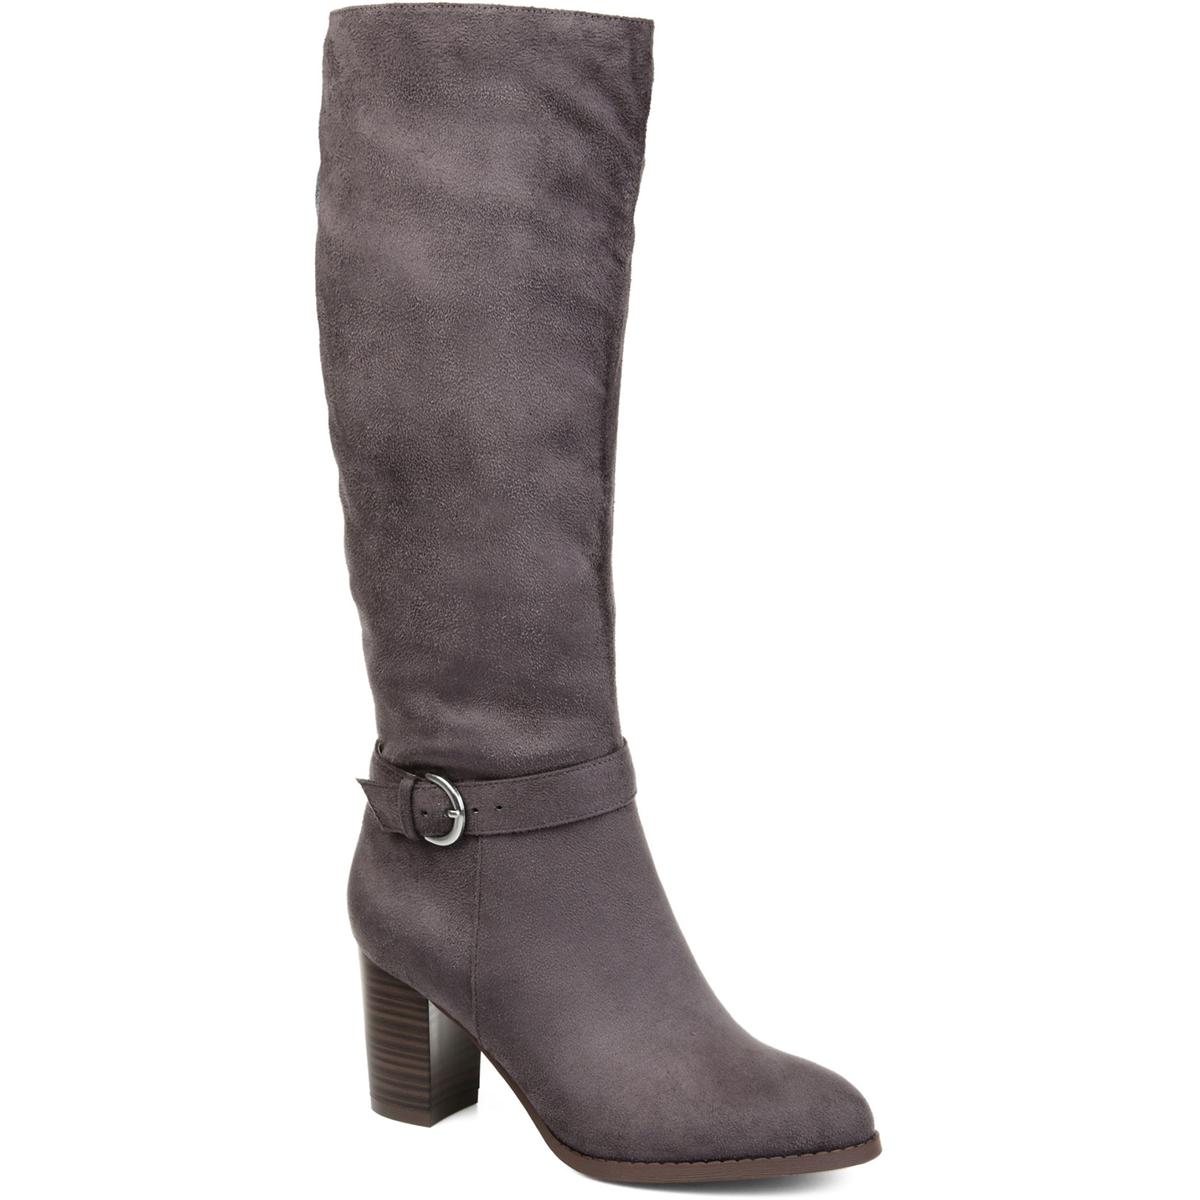 Journee Collection Joelle Womens Extra Wide Calf Tall Knee-High Boots